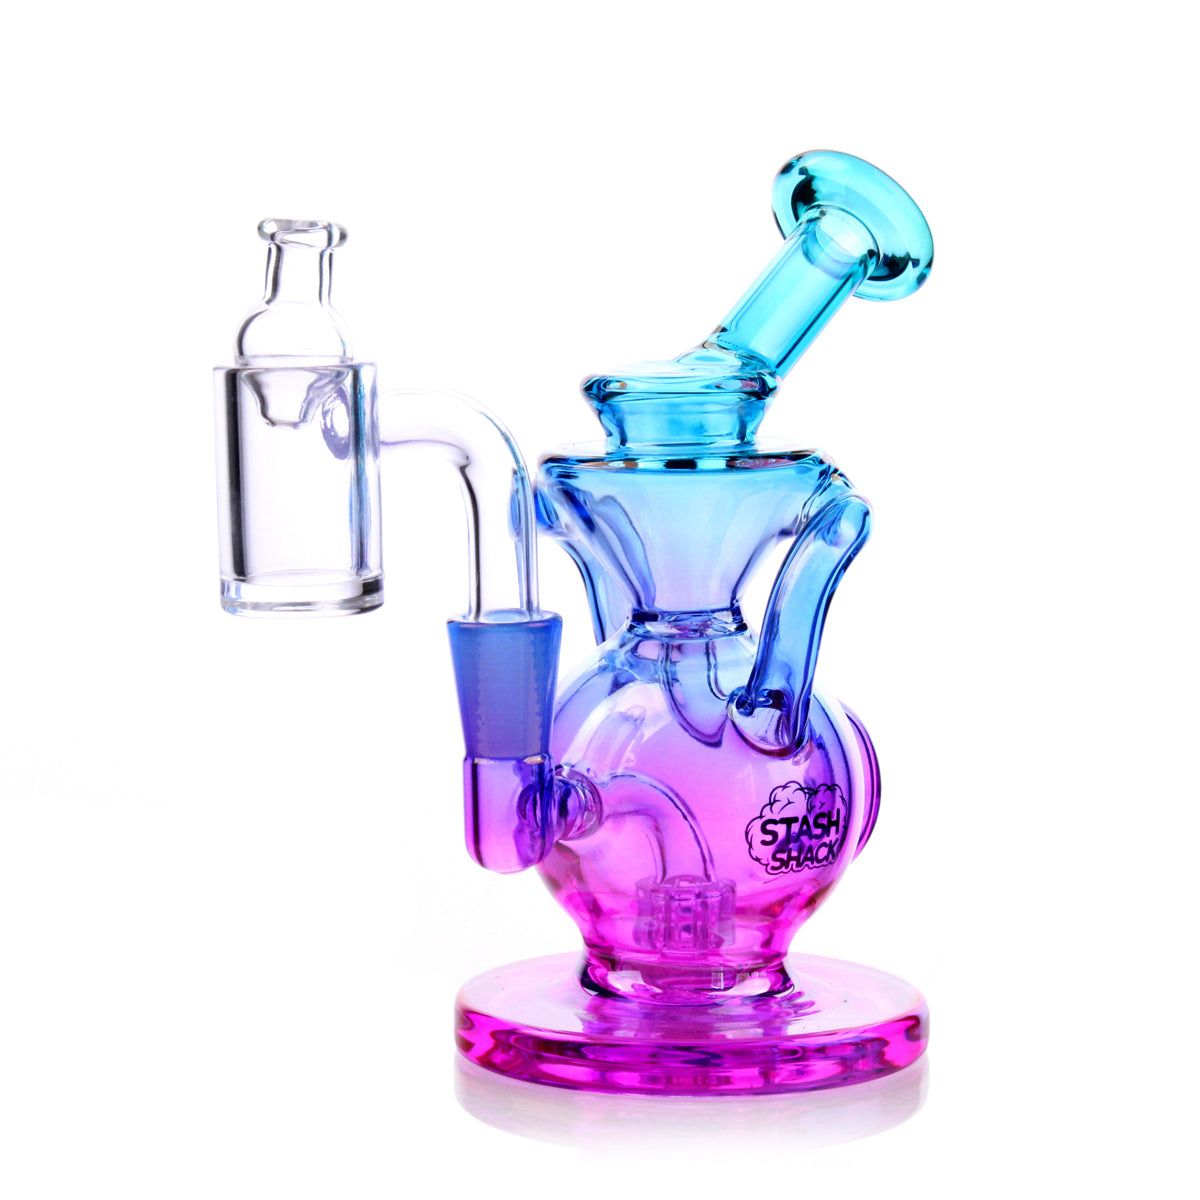 Lirio Mini Rig by The Stash Shack, portable 5.5" dab rig with blue to purple gradient and recycler percolator, front view